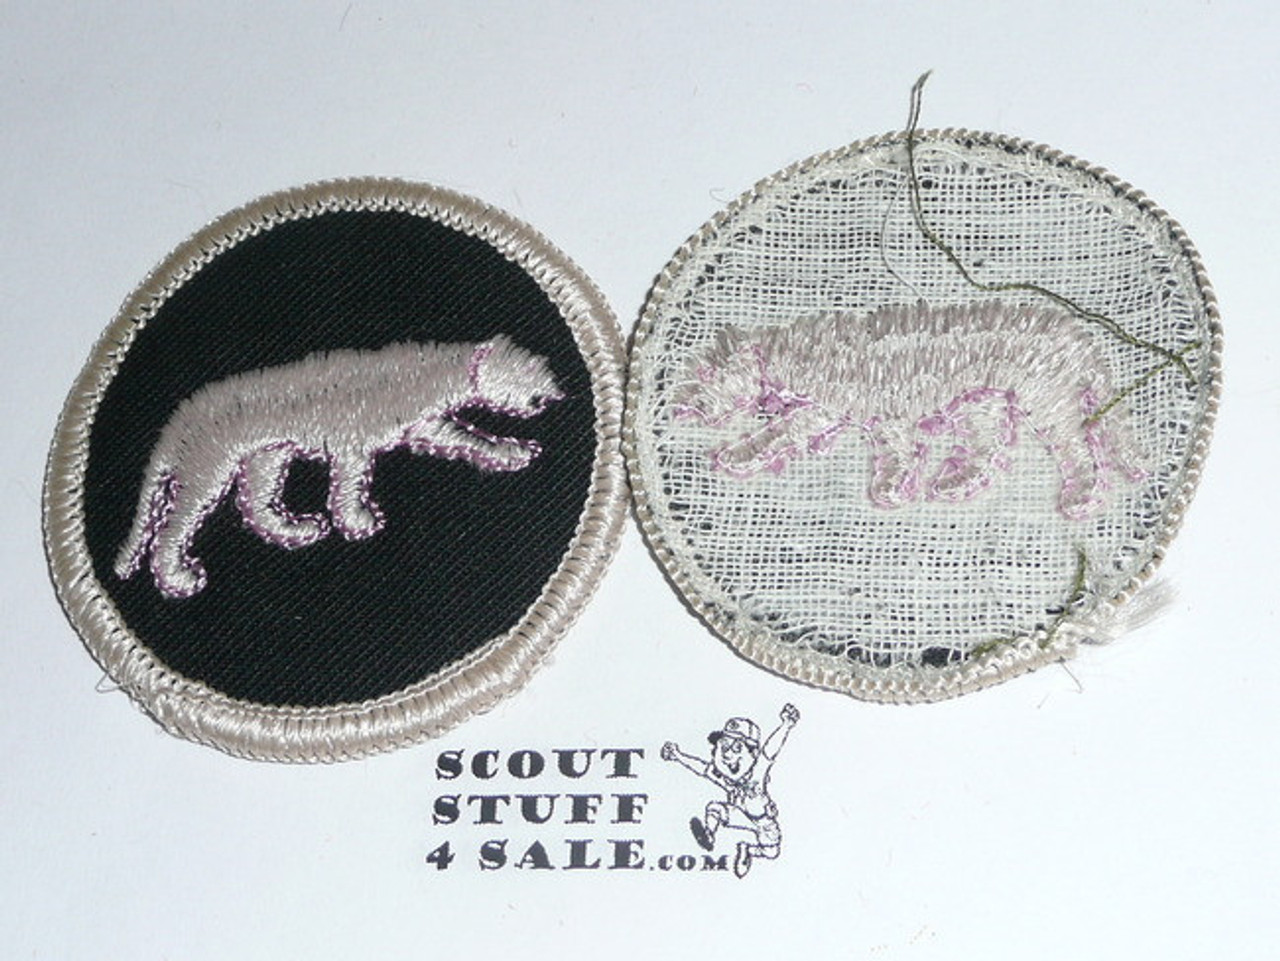 Panther Patrol Medallion, Black Twill (pink outline of panther) with gauze back, 1972-1989, used